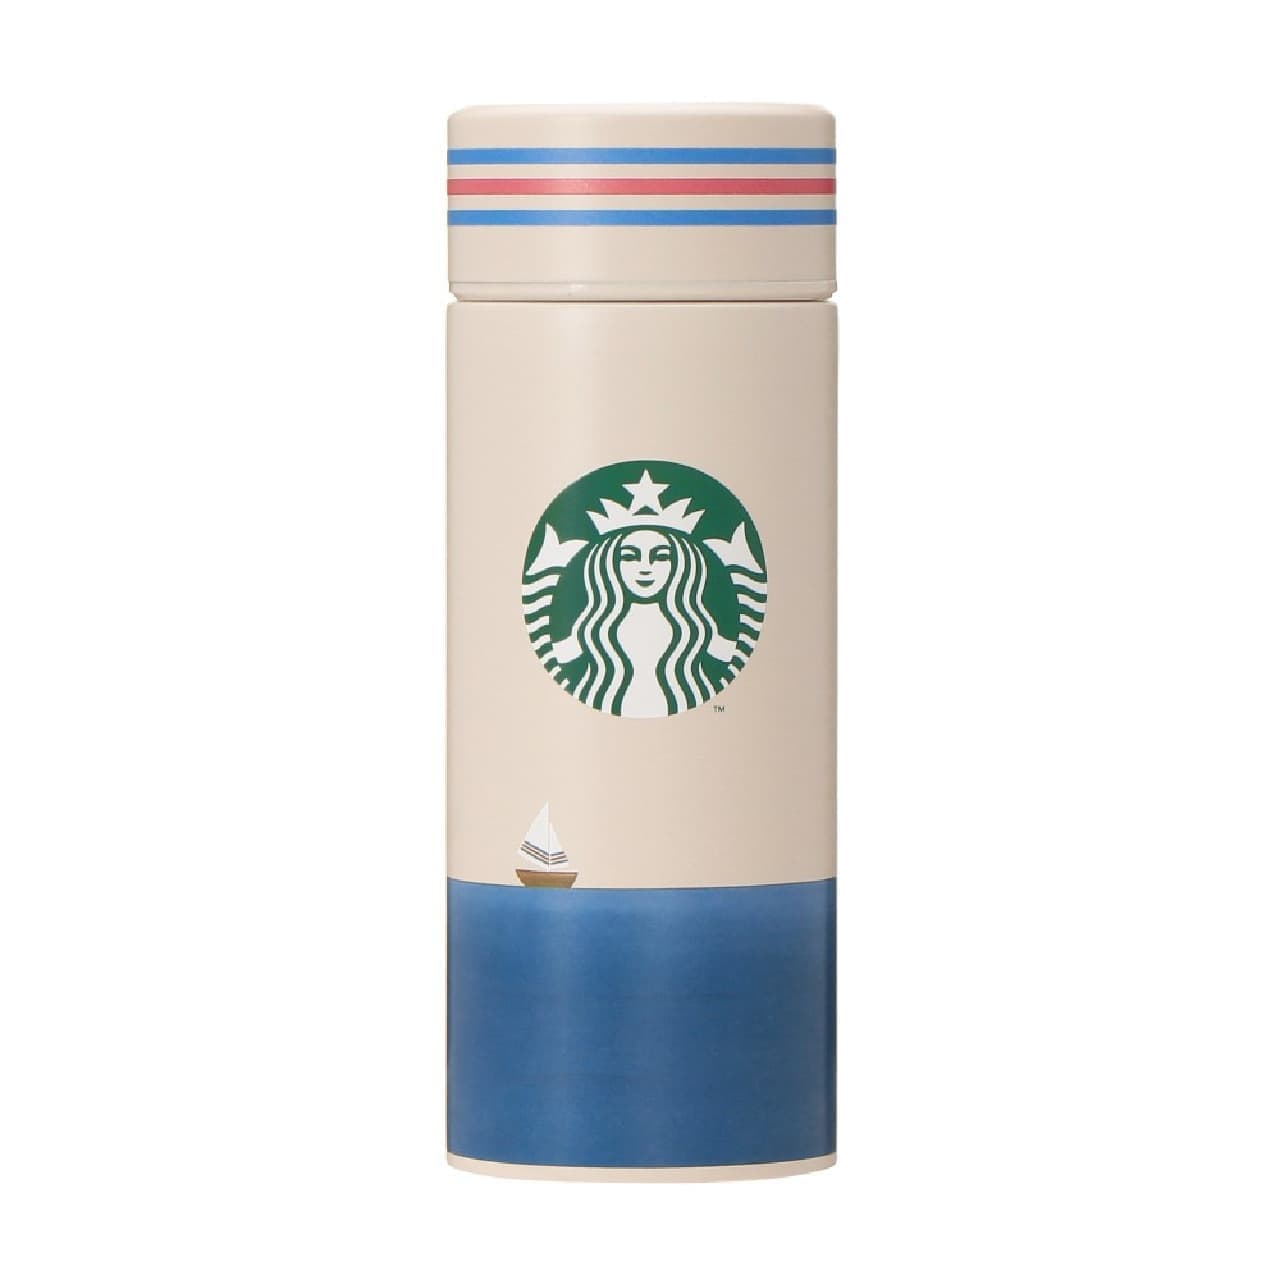 Starbucks] For Father's Day (6/16)! Stylish gift specials including coffee, tumblers, cards, etc.